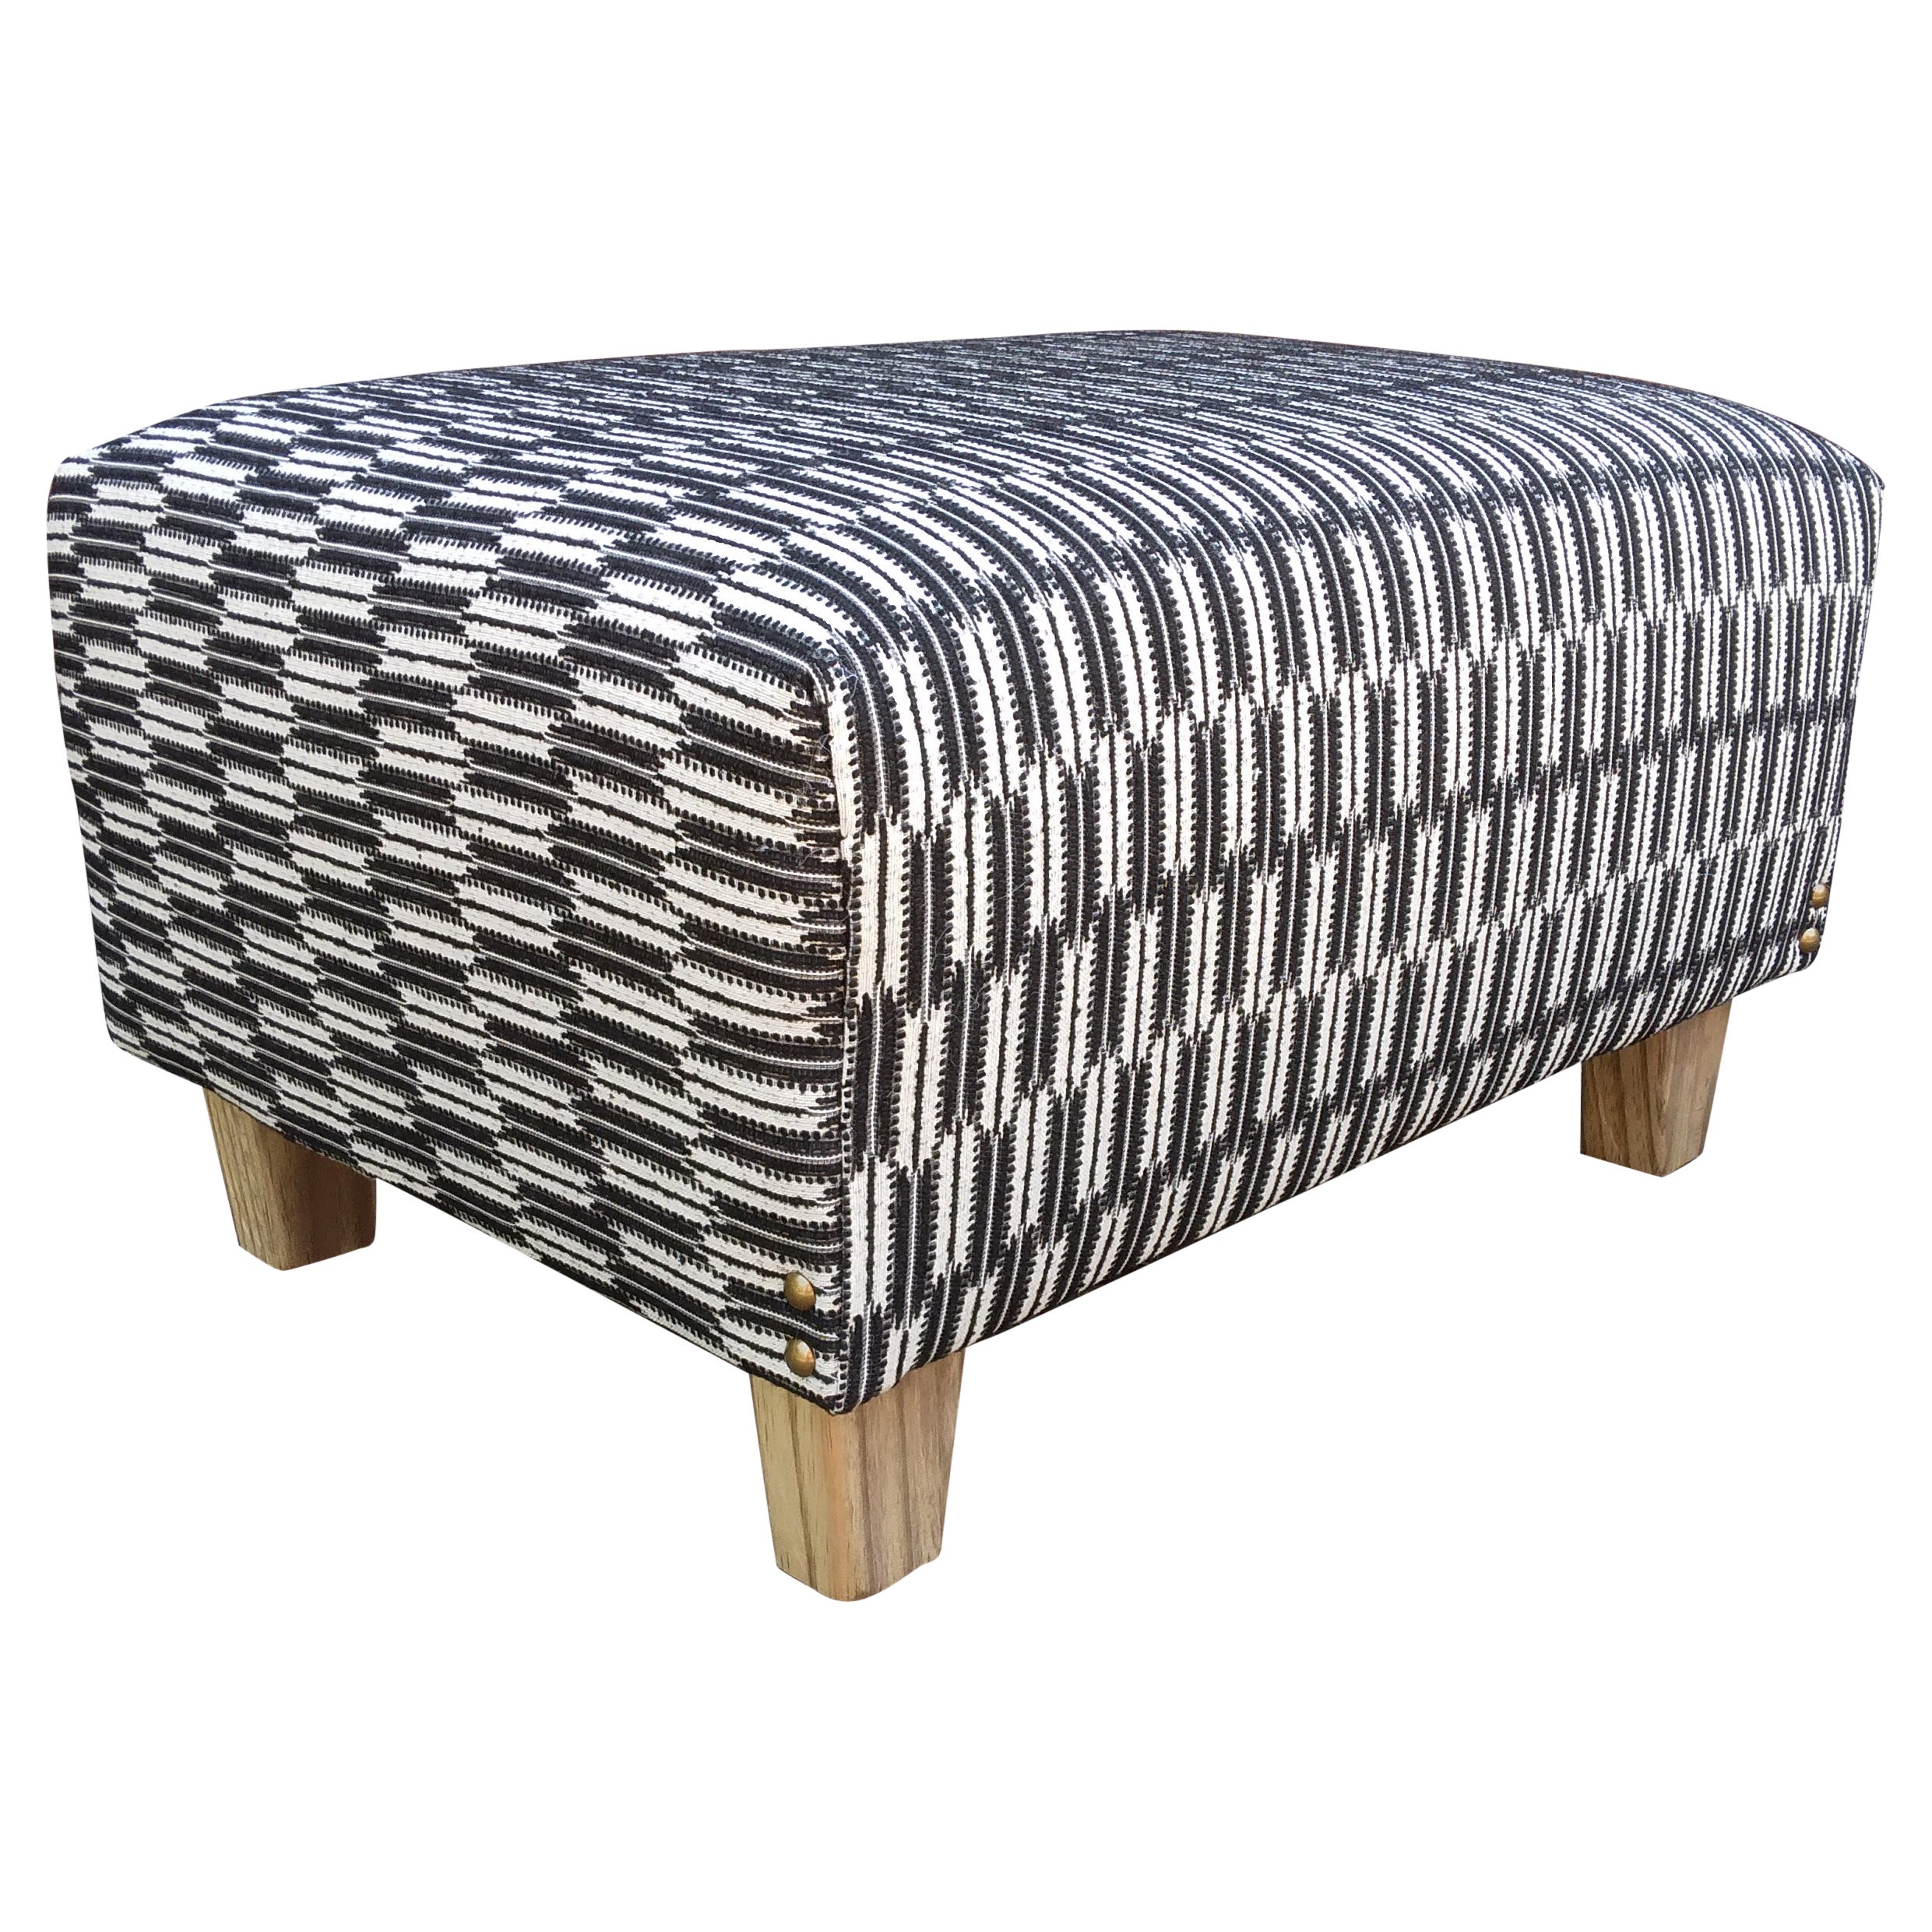 Contemporary Ottoman/Footstool in Black & White Woven Jacquard